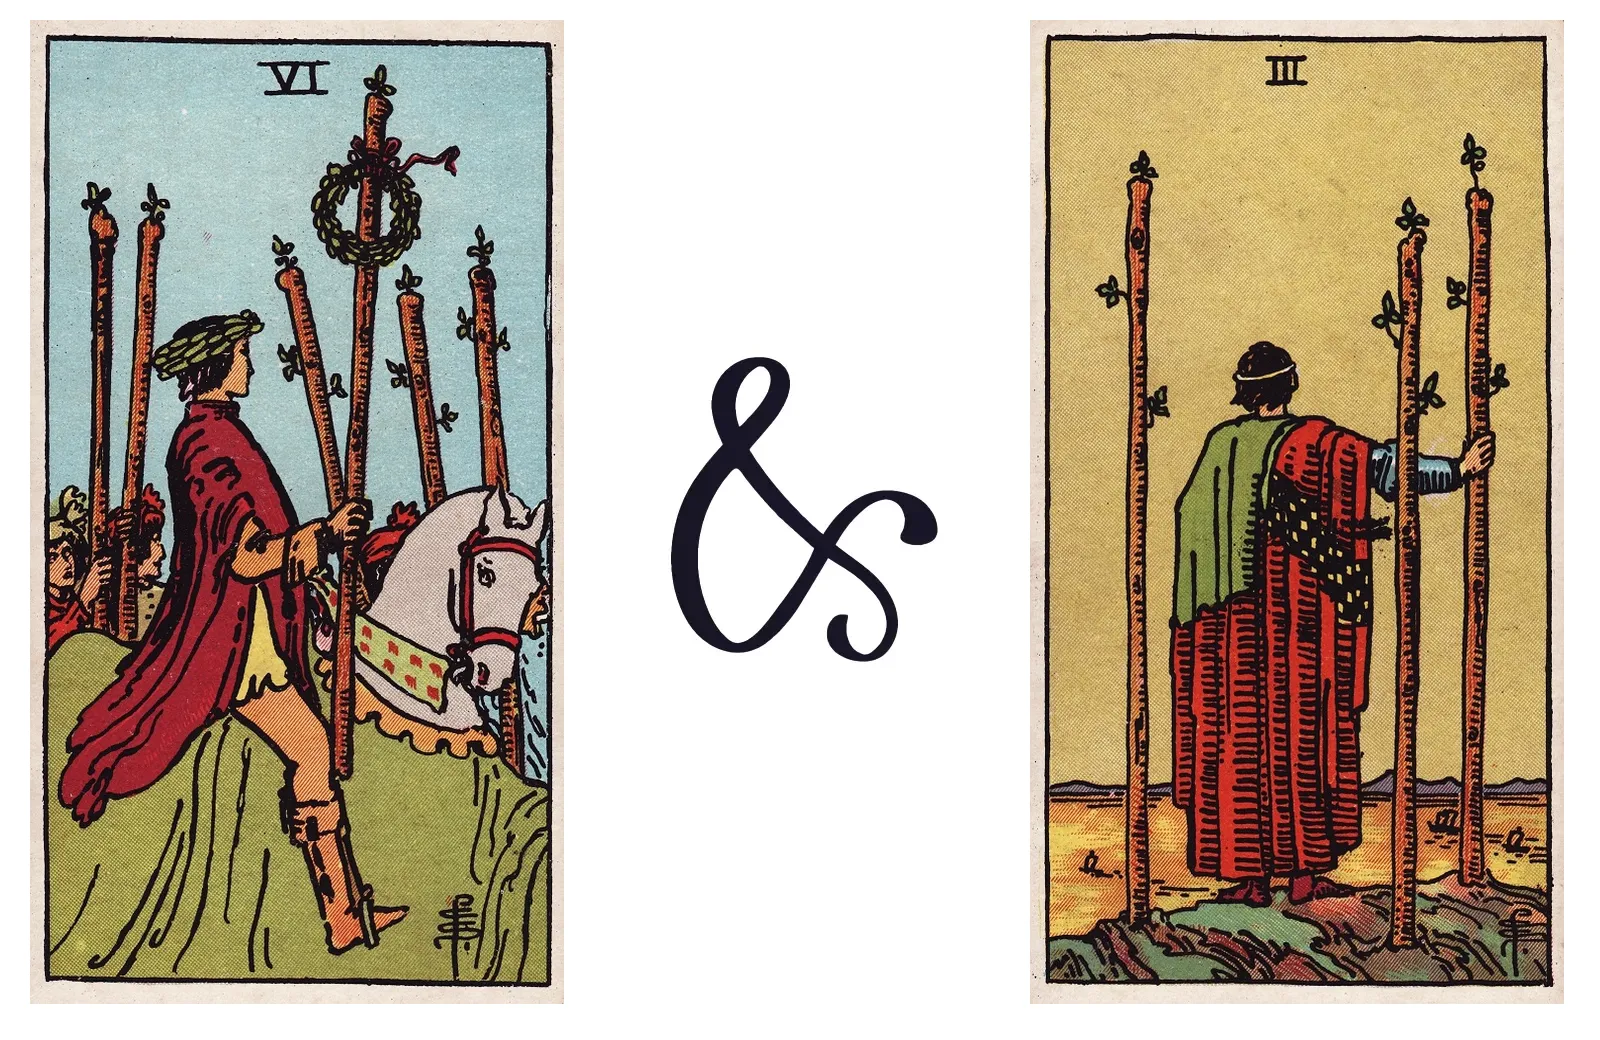 Six of Wands and Three of Wands